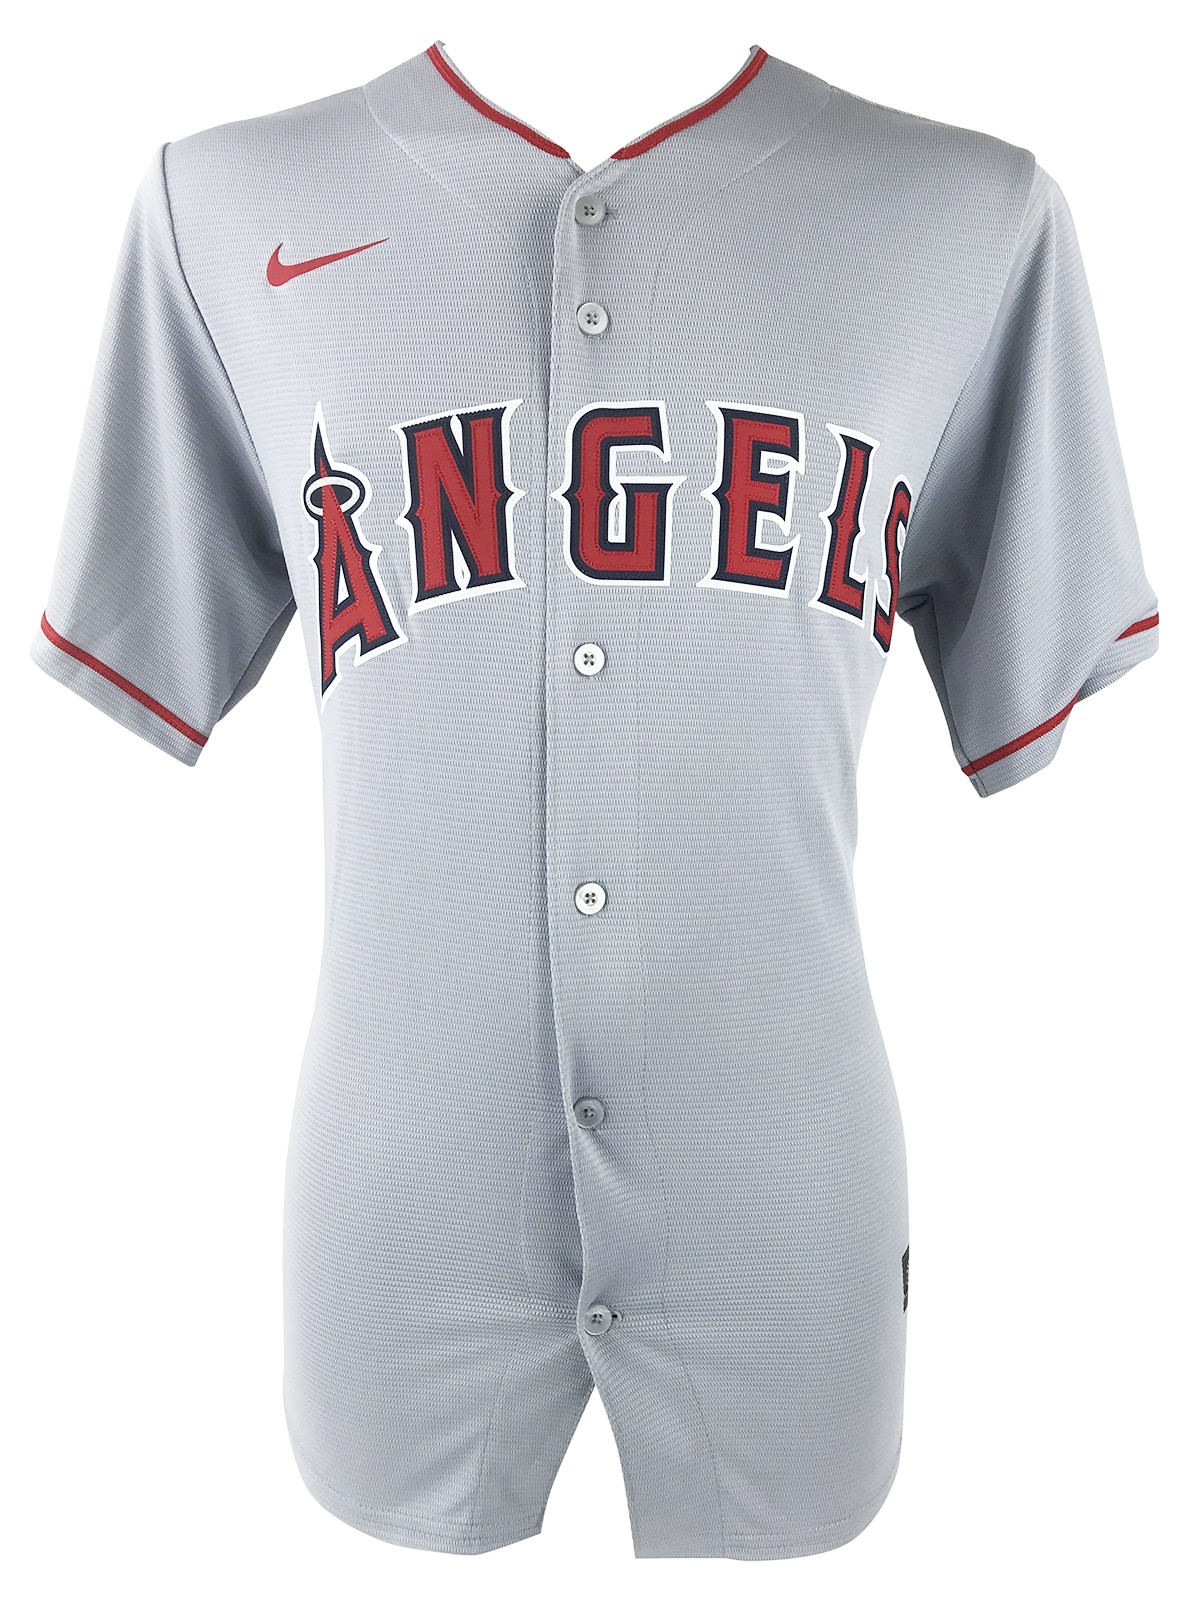 mike trout grey jersey